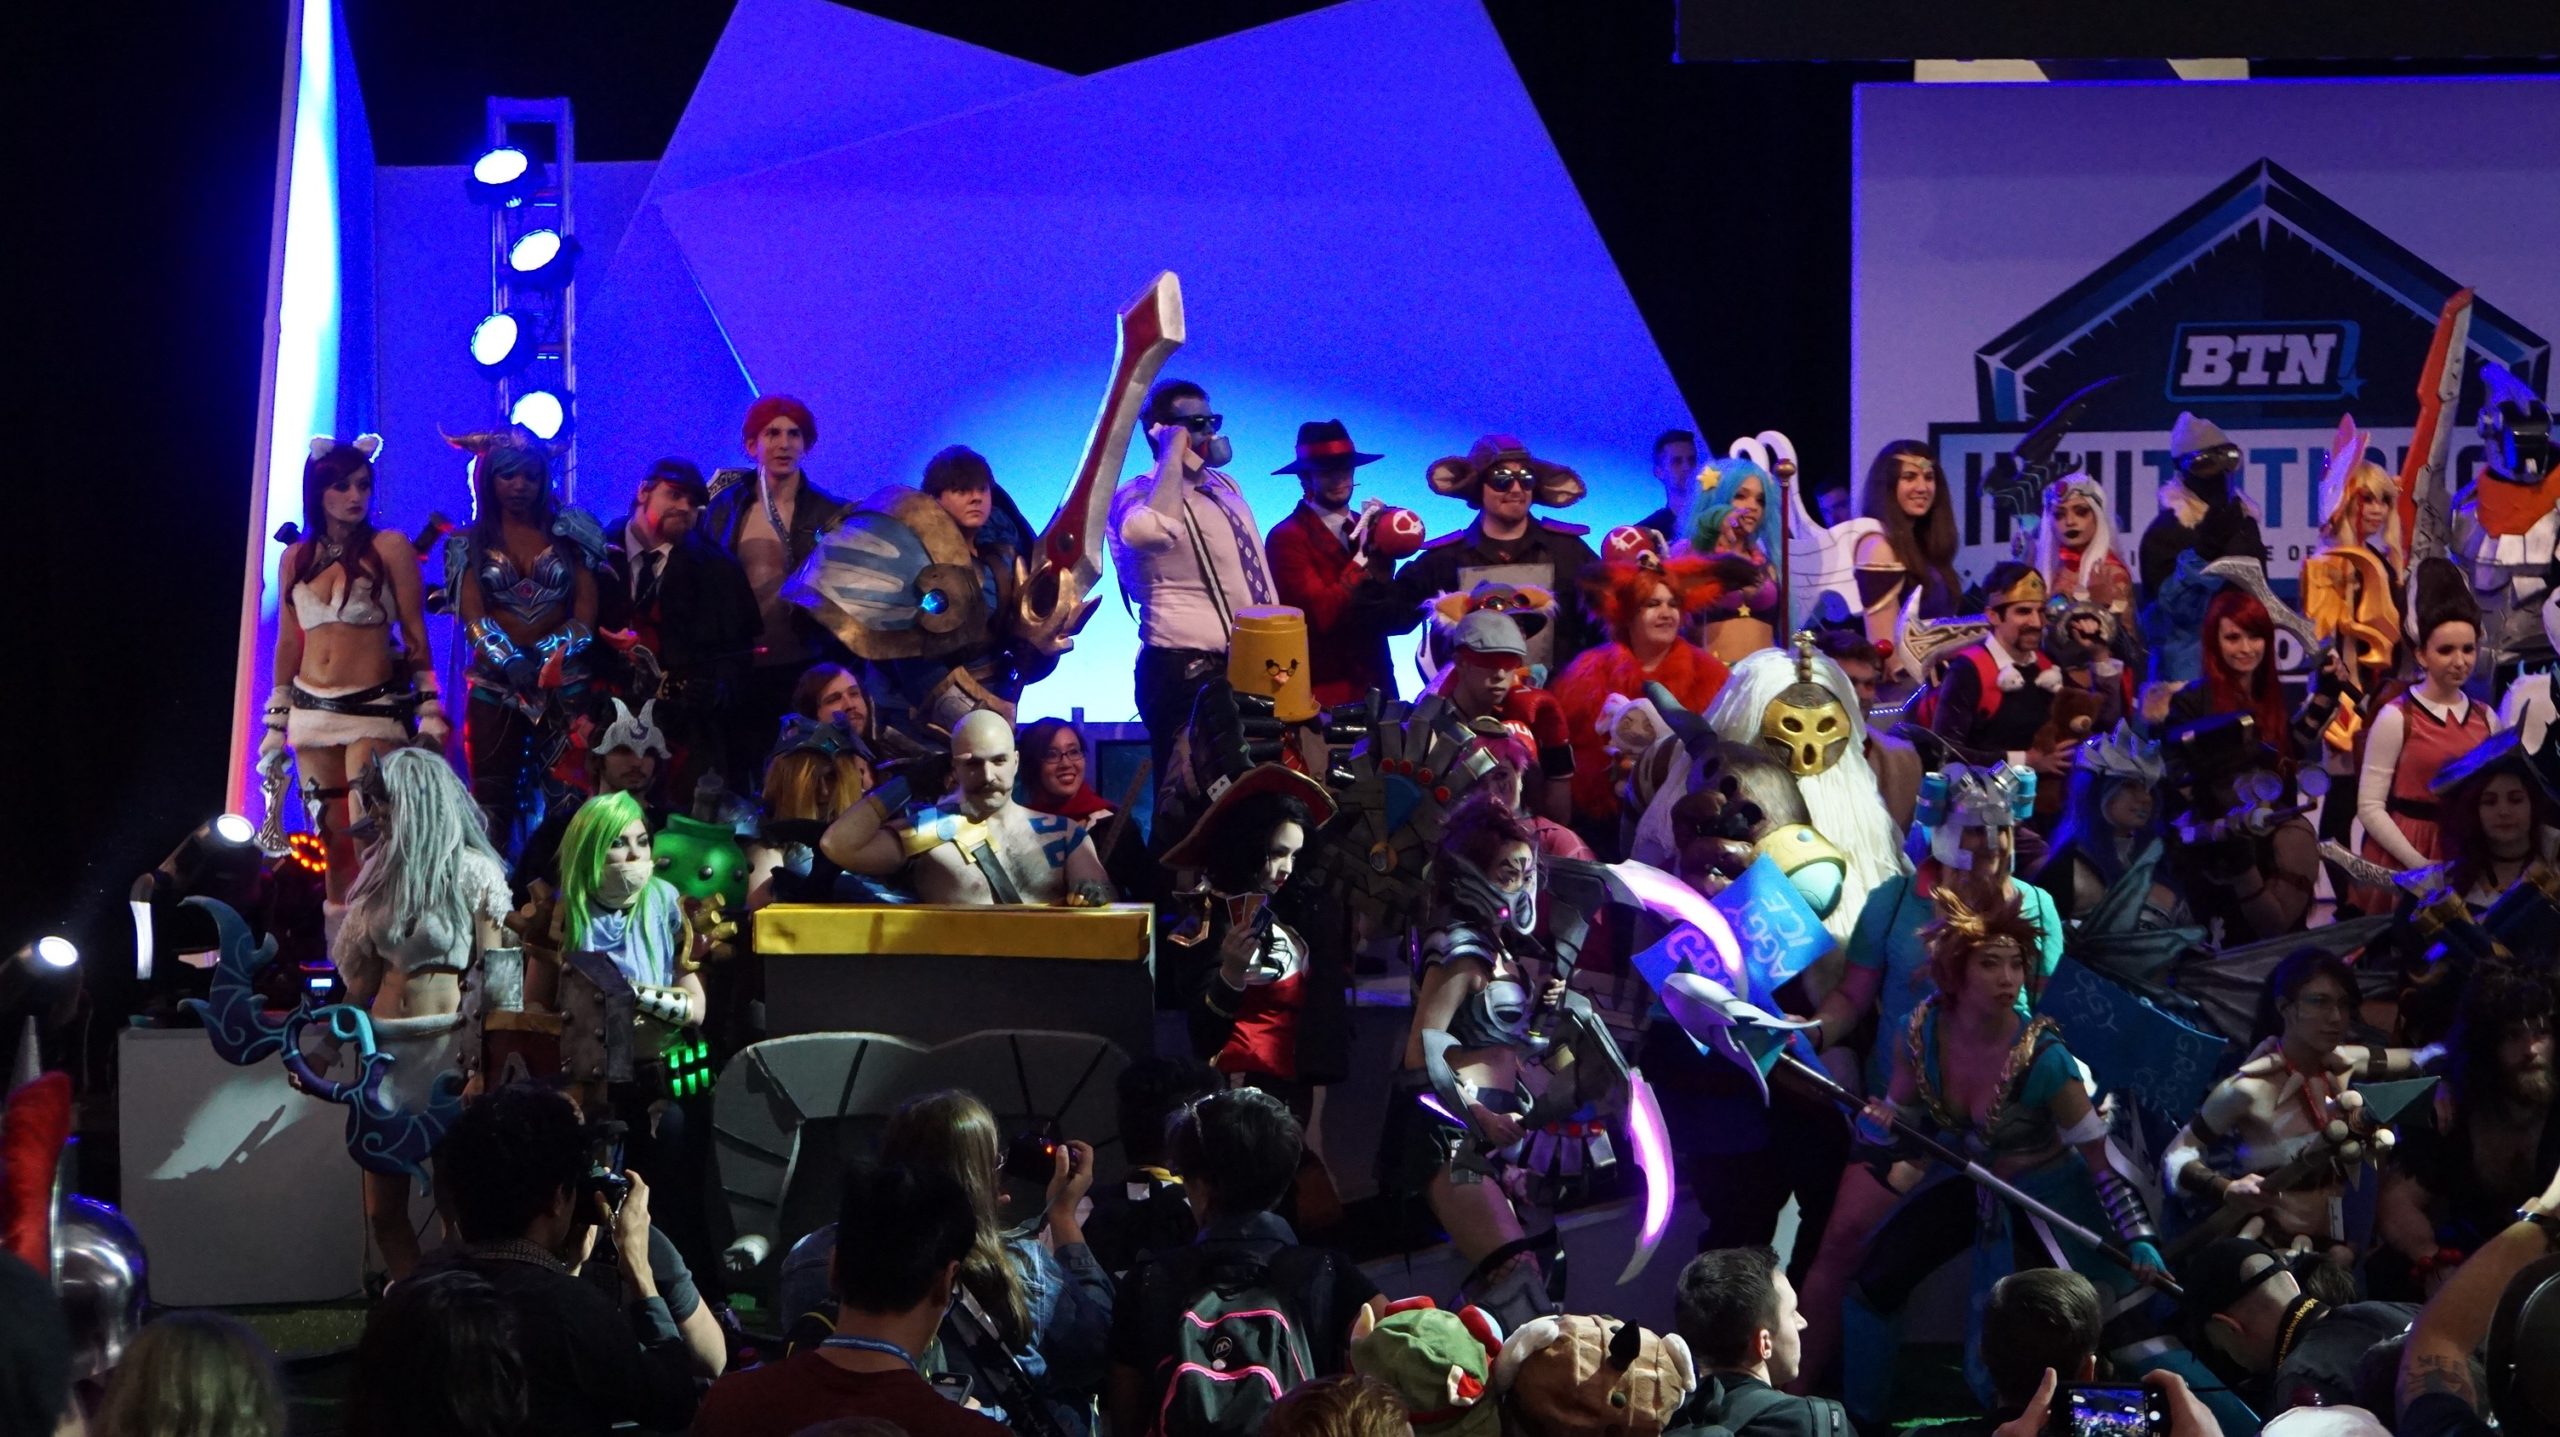 That’s A Lot Of League Of Legends Cosplay